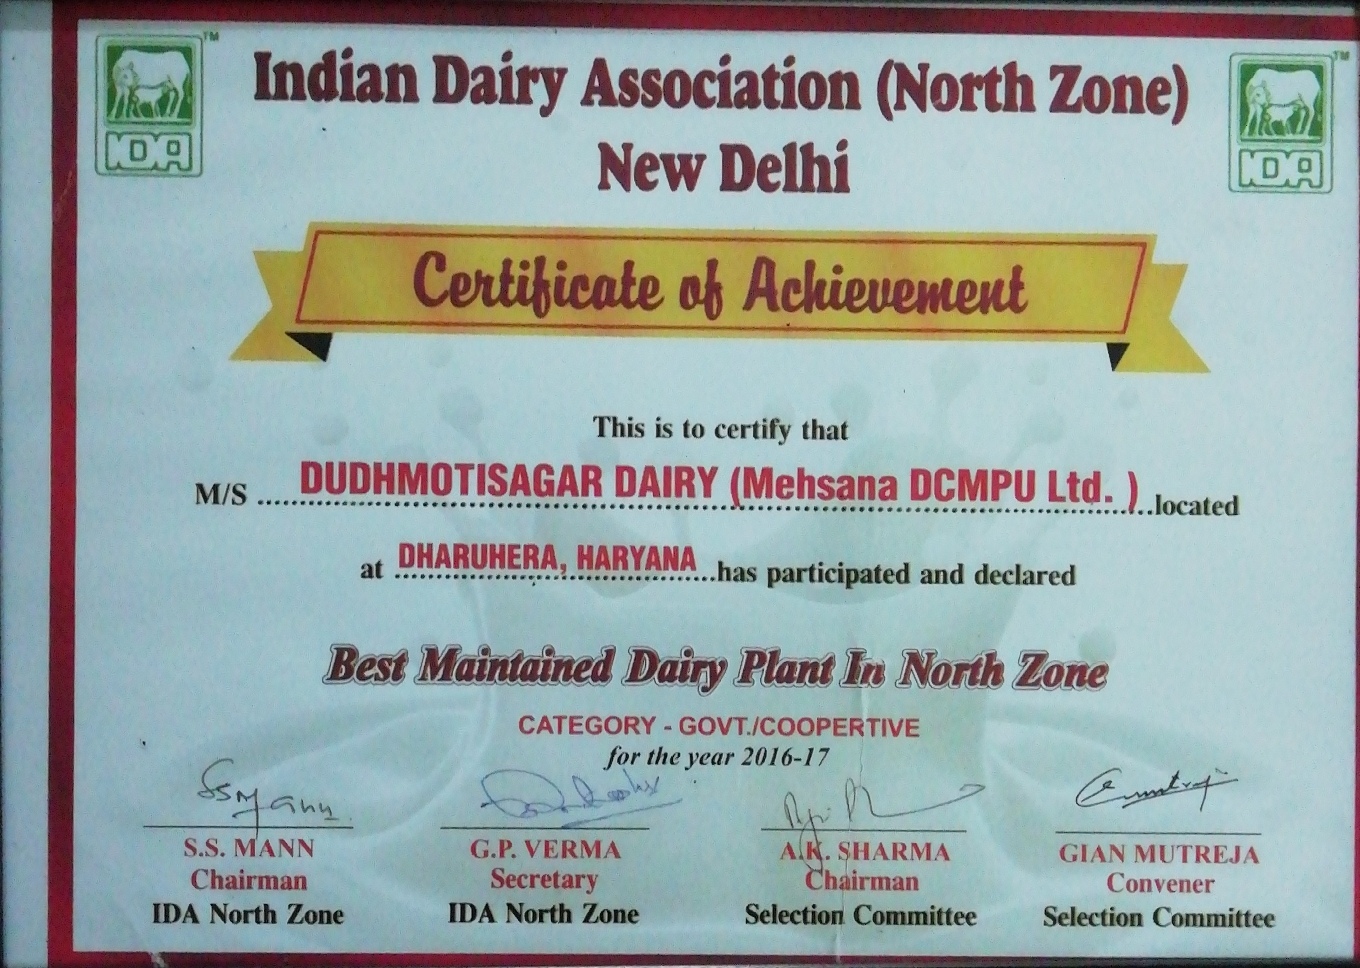 Certificate of Best Maintained Dairy Plant in the North Zone